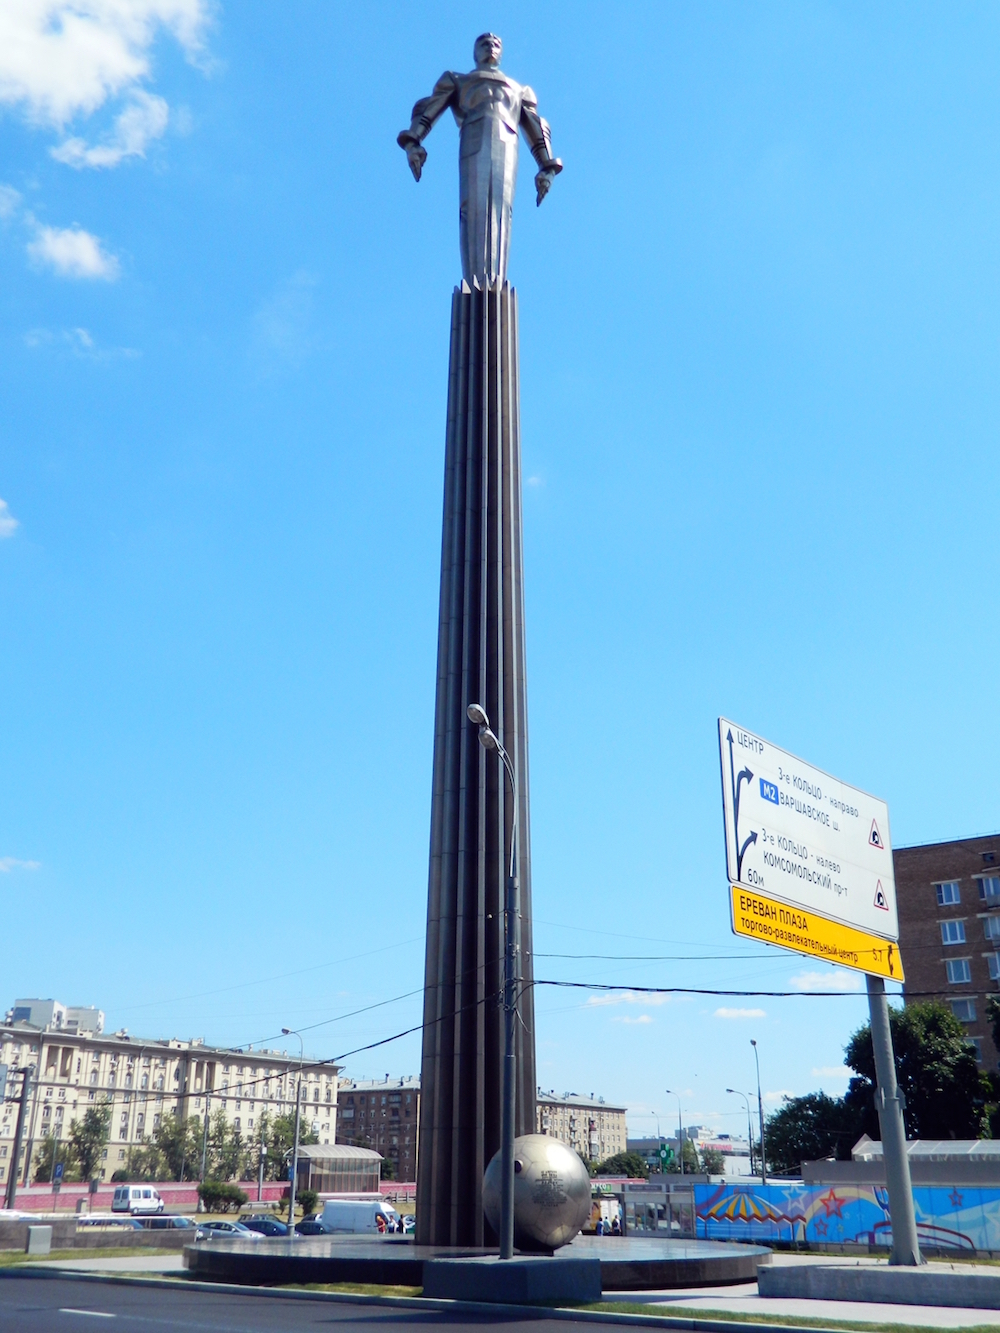 The Gagarin monument in Moscow (image: Tara-Amingu under a CC licence)